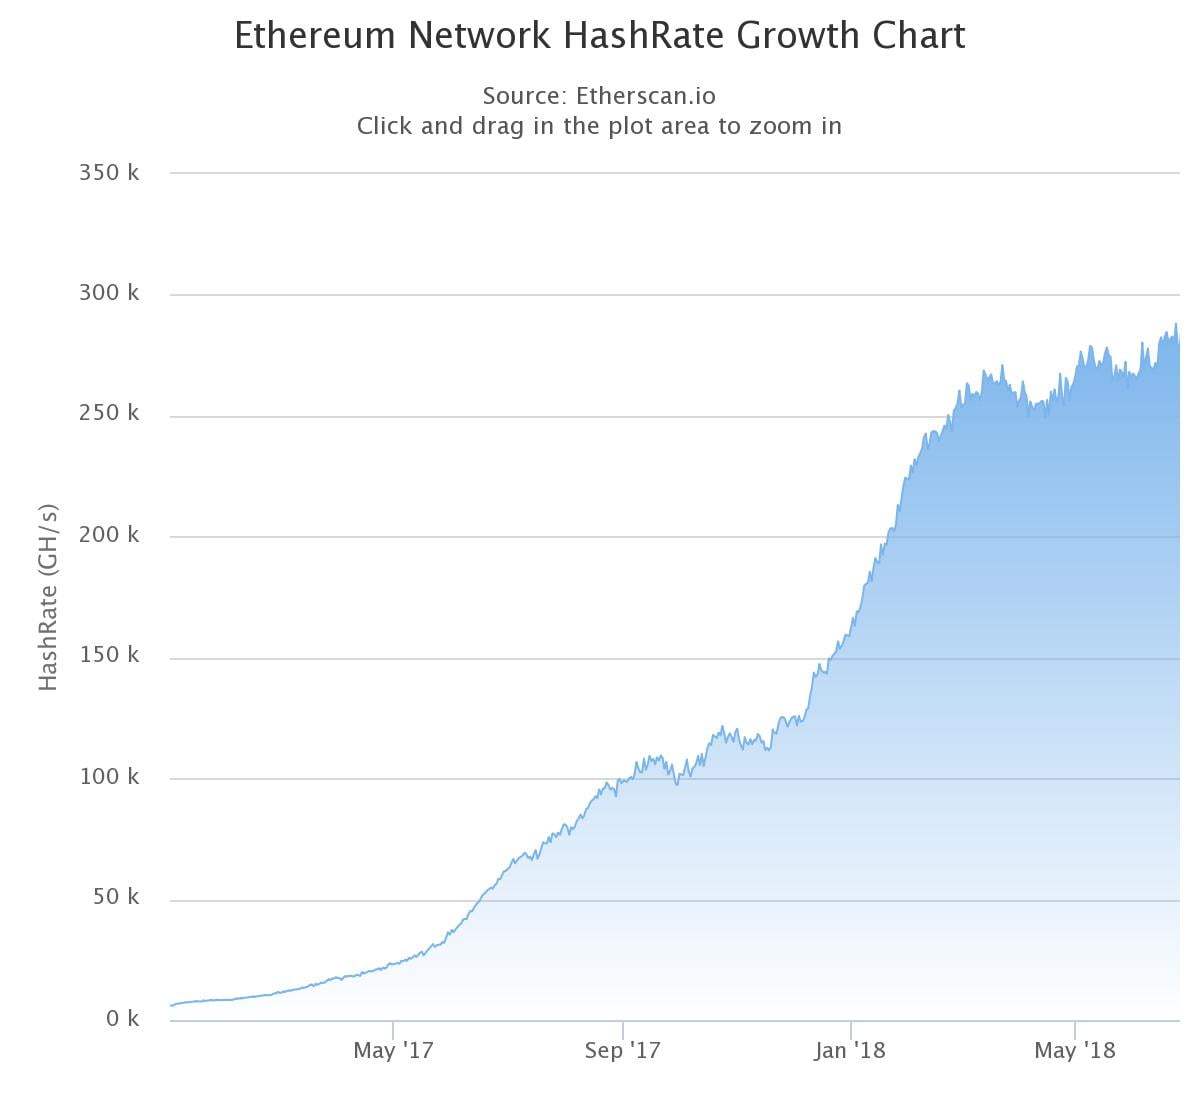 Chart Courtesy of EtherScan.io